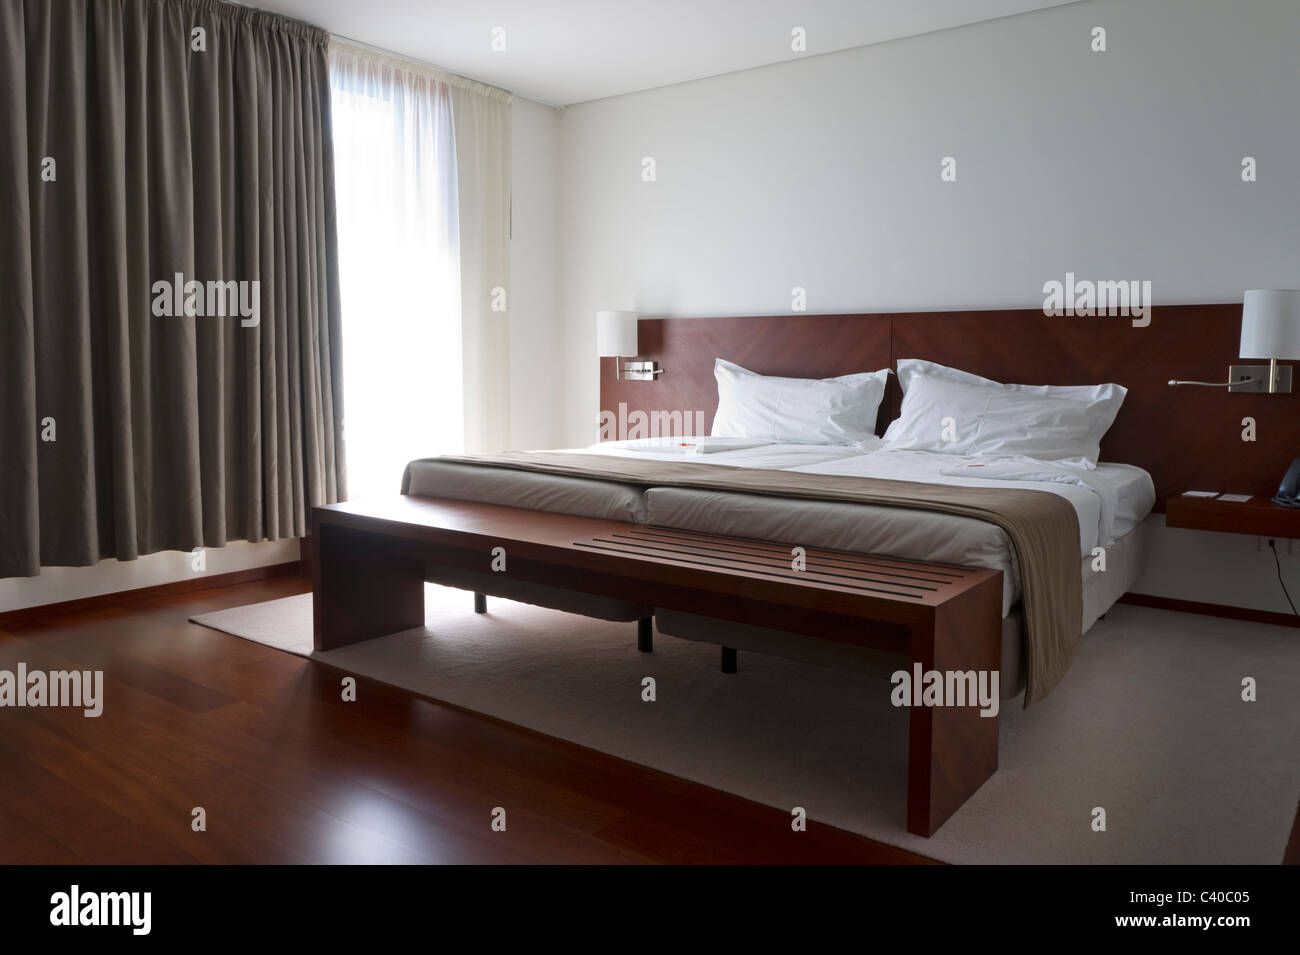 Hotel room with modern design Stock Photo